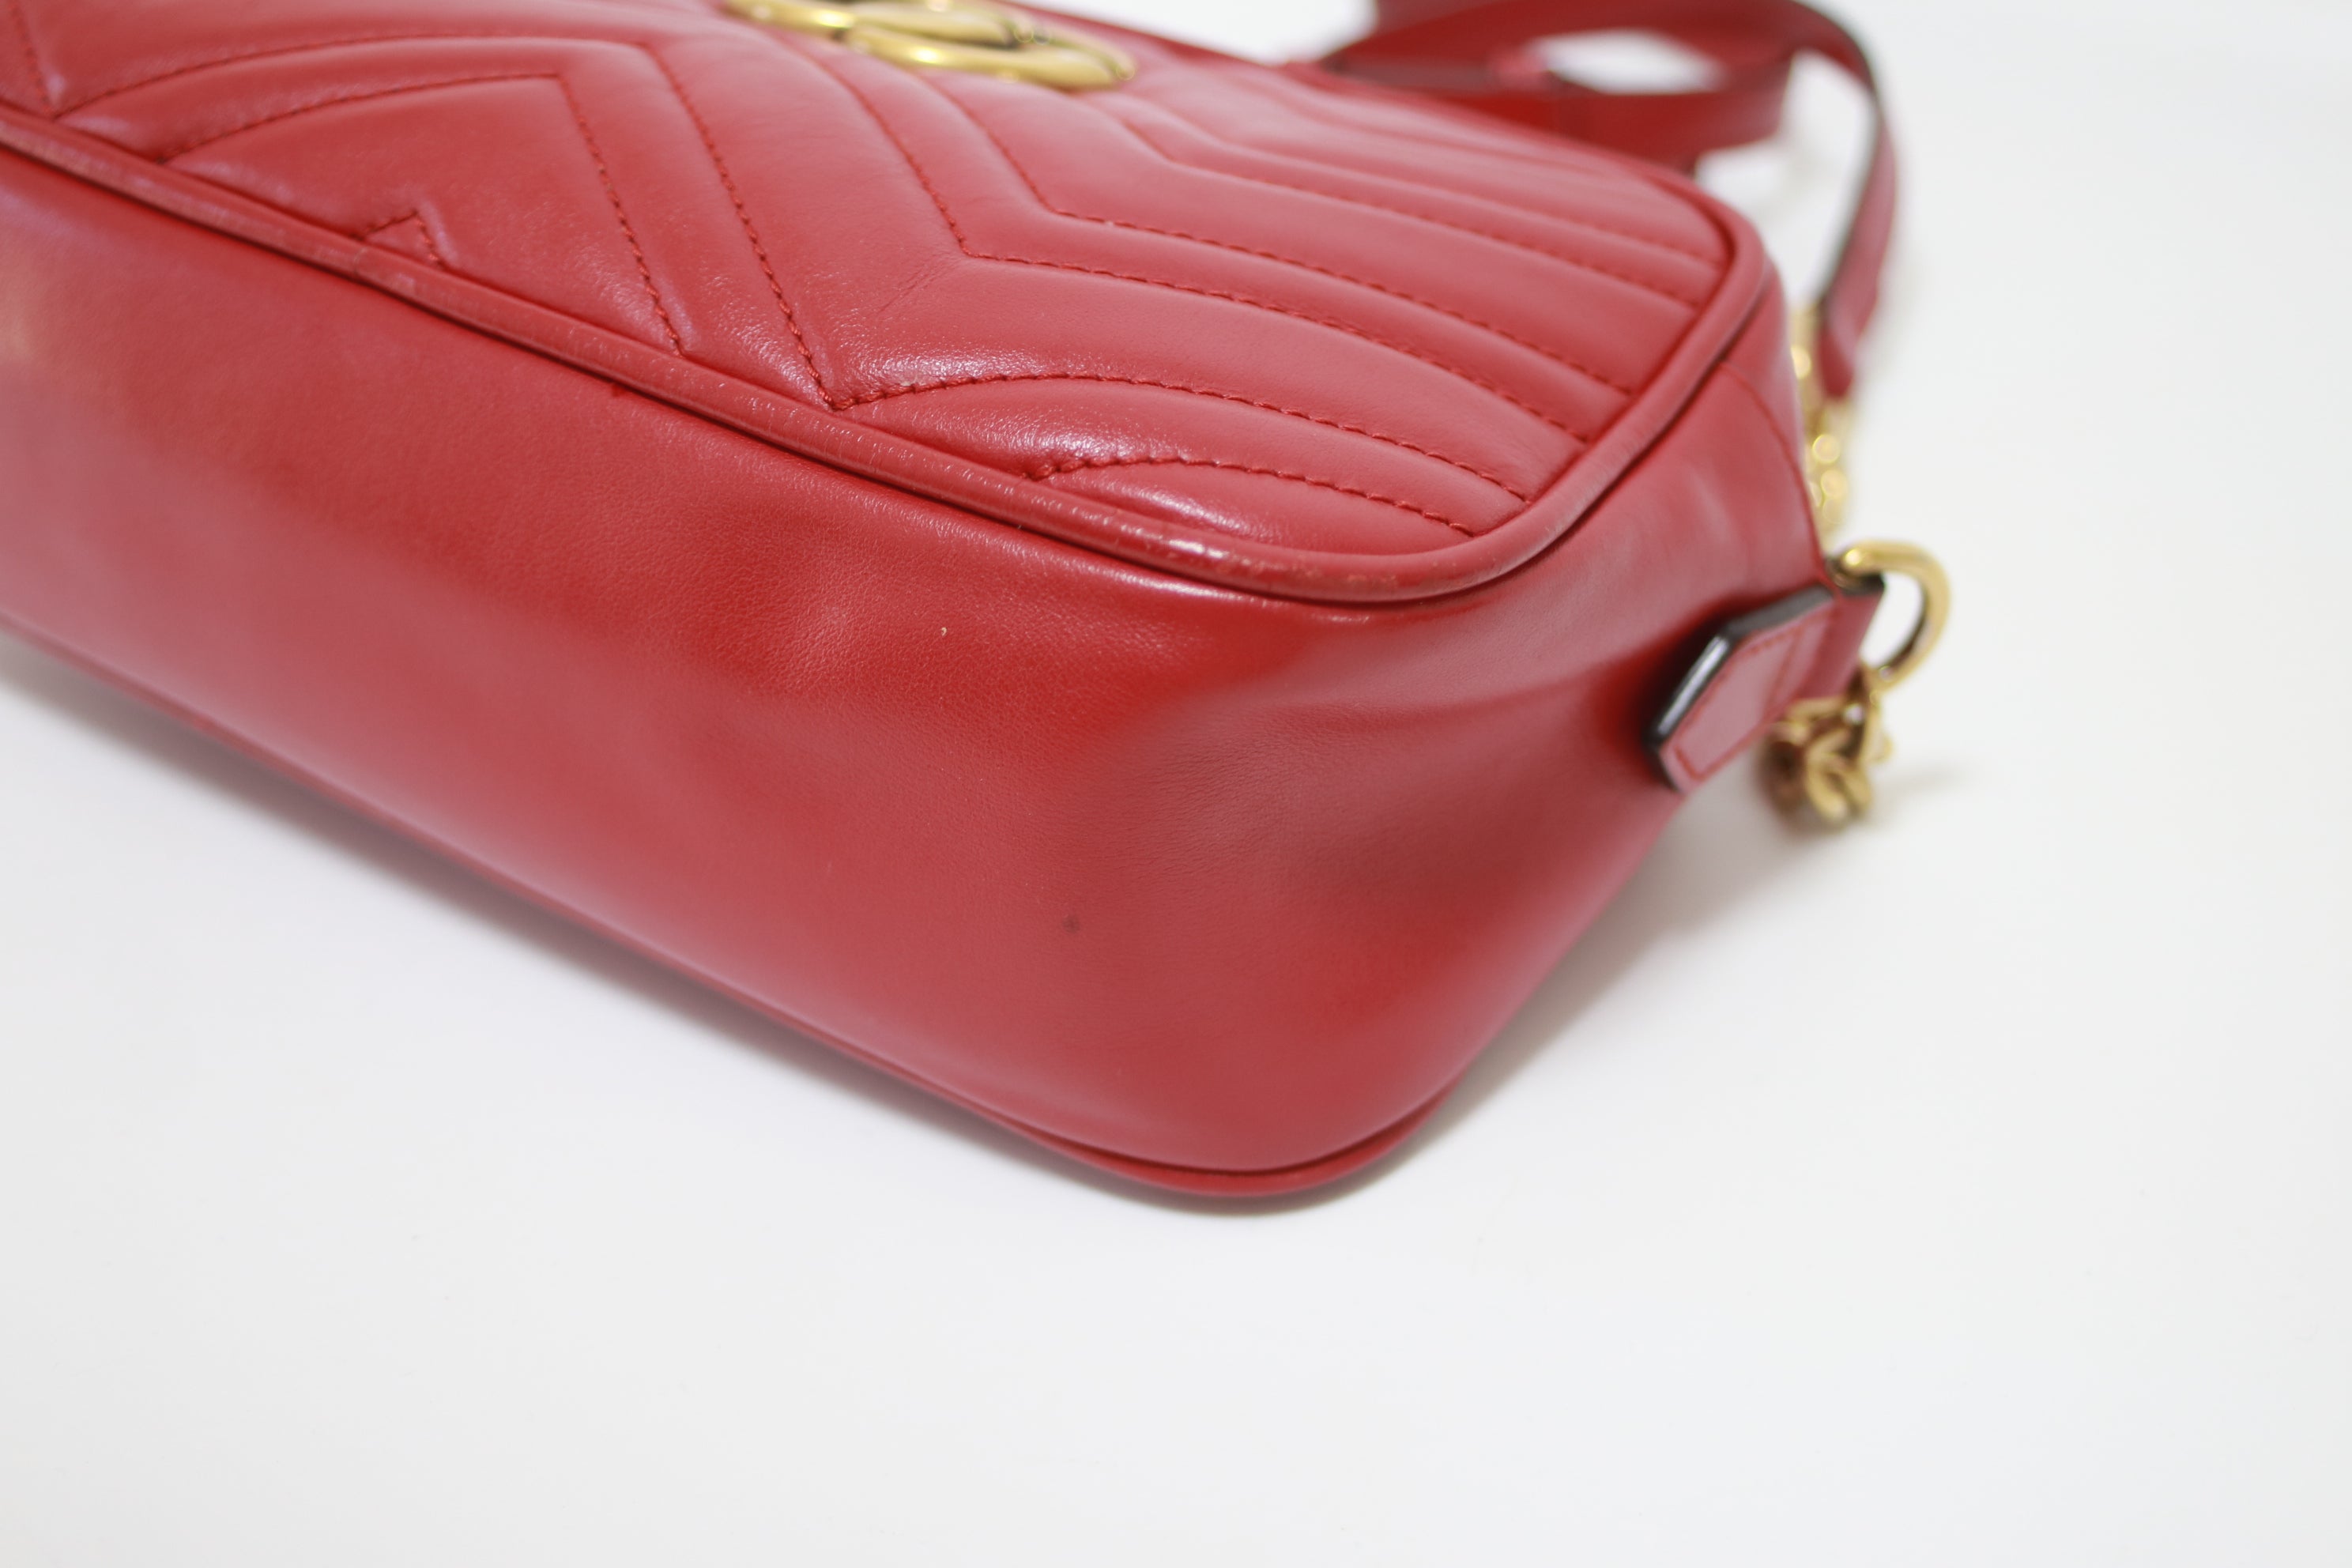 Gucci Marmont Shoulder Bag Red Used (7553)